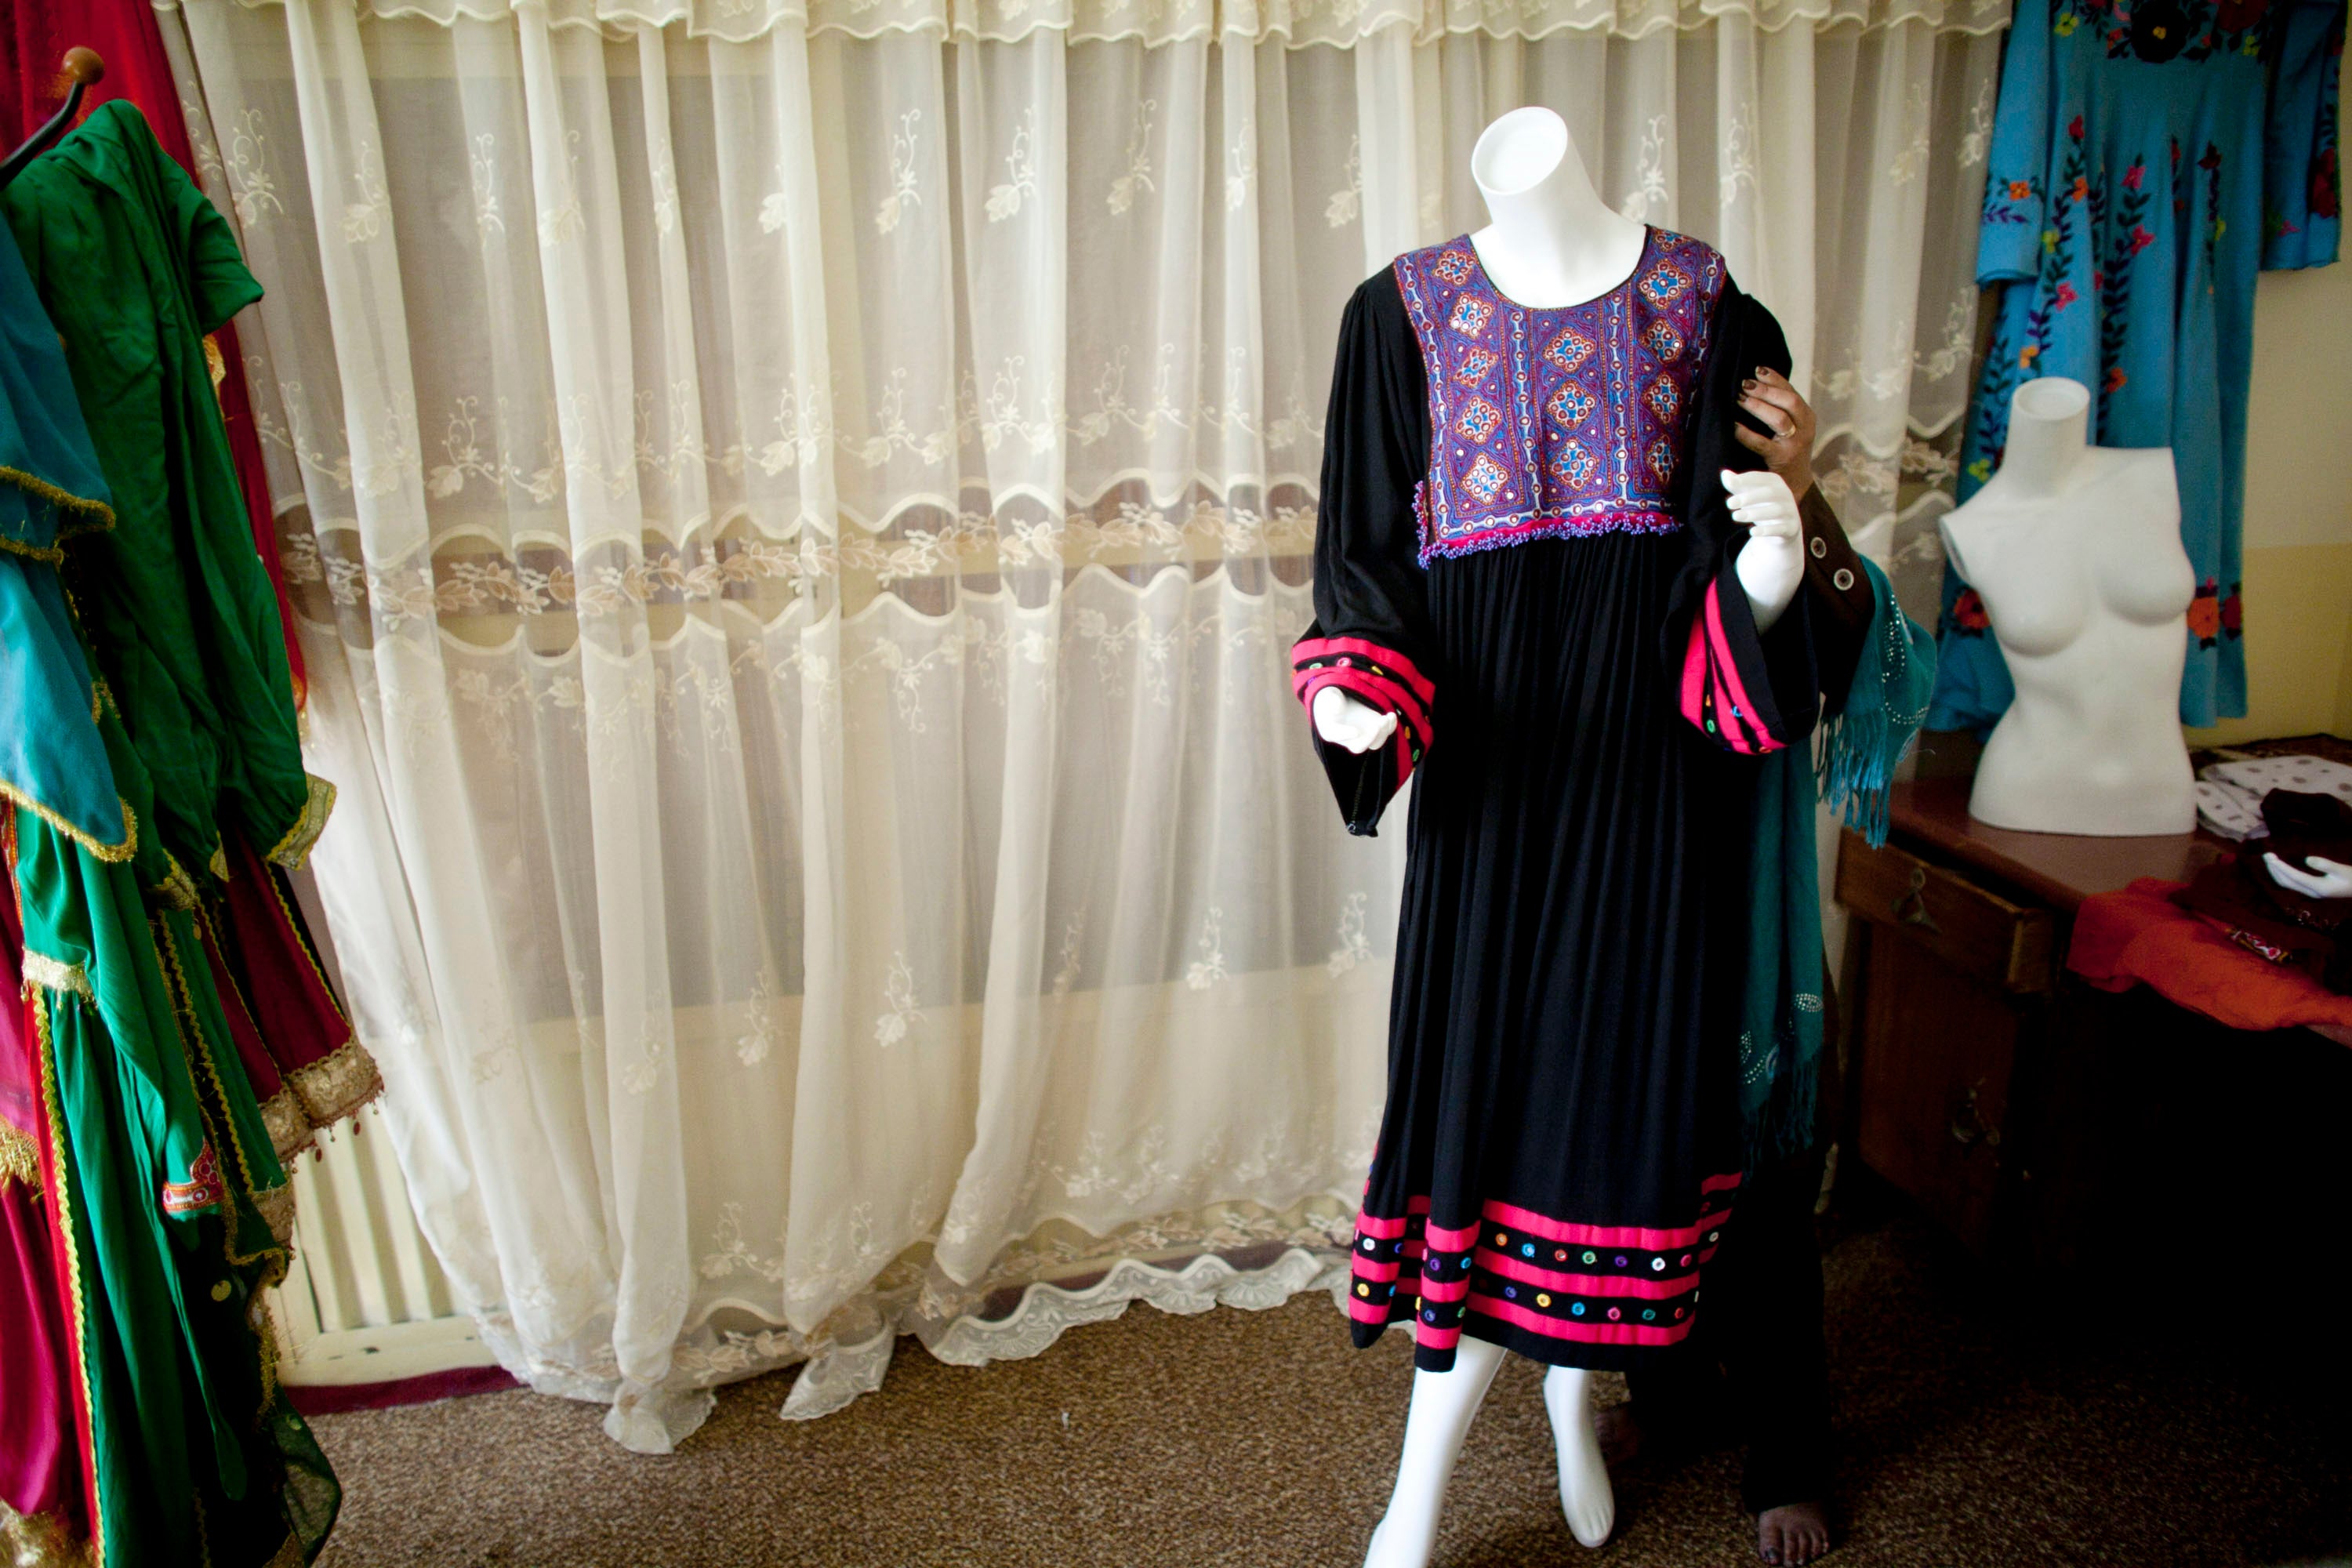 Mannequin pictured in Afghanistan’s capital of Kabul in 2010